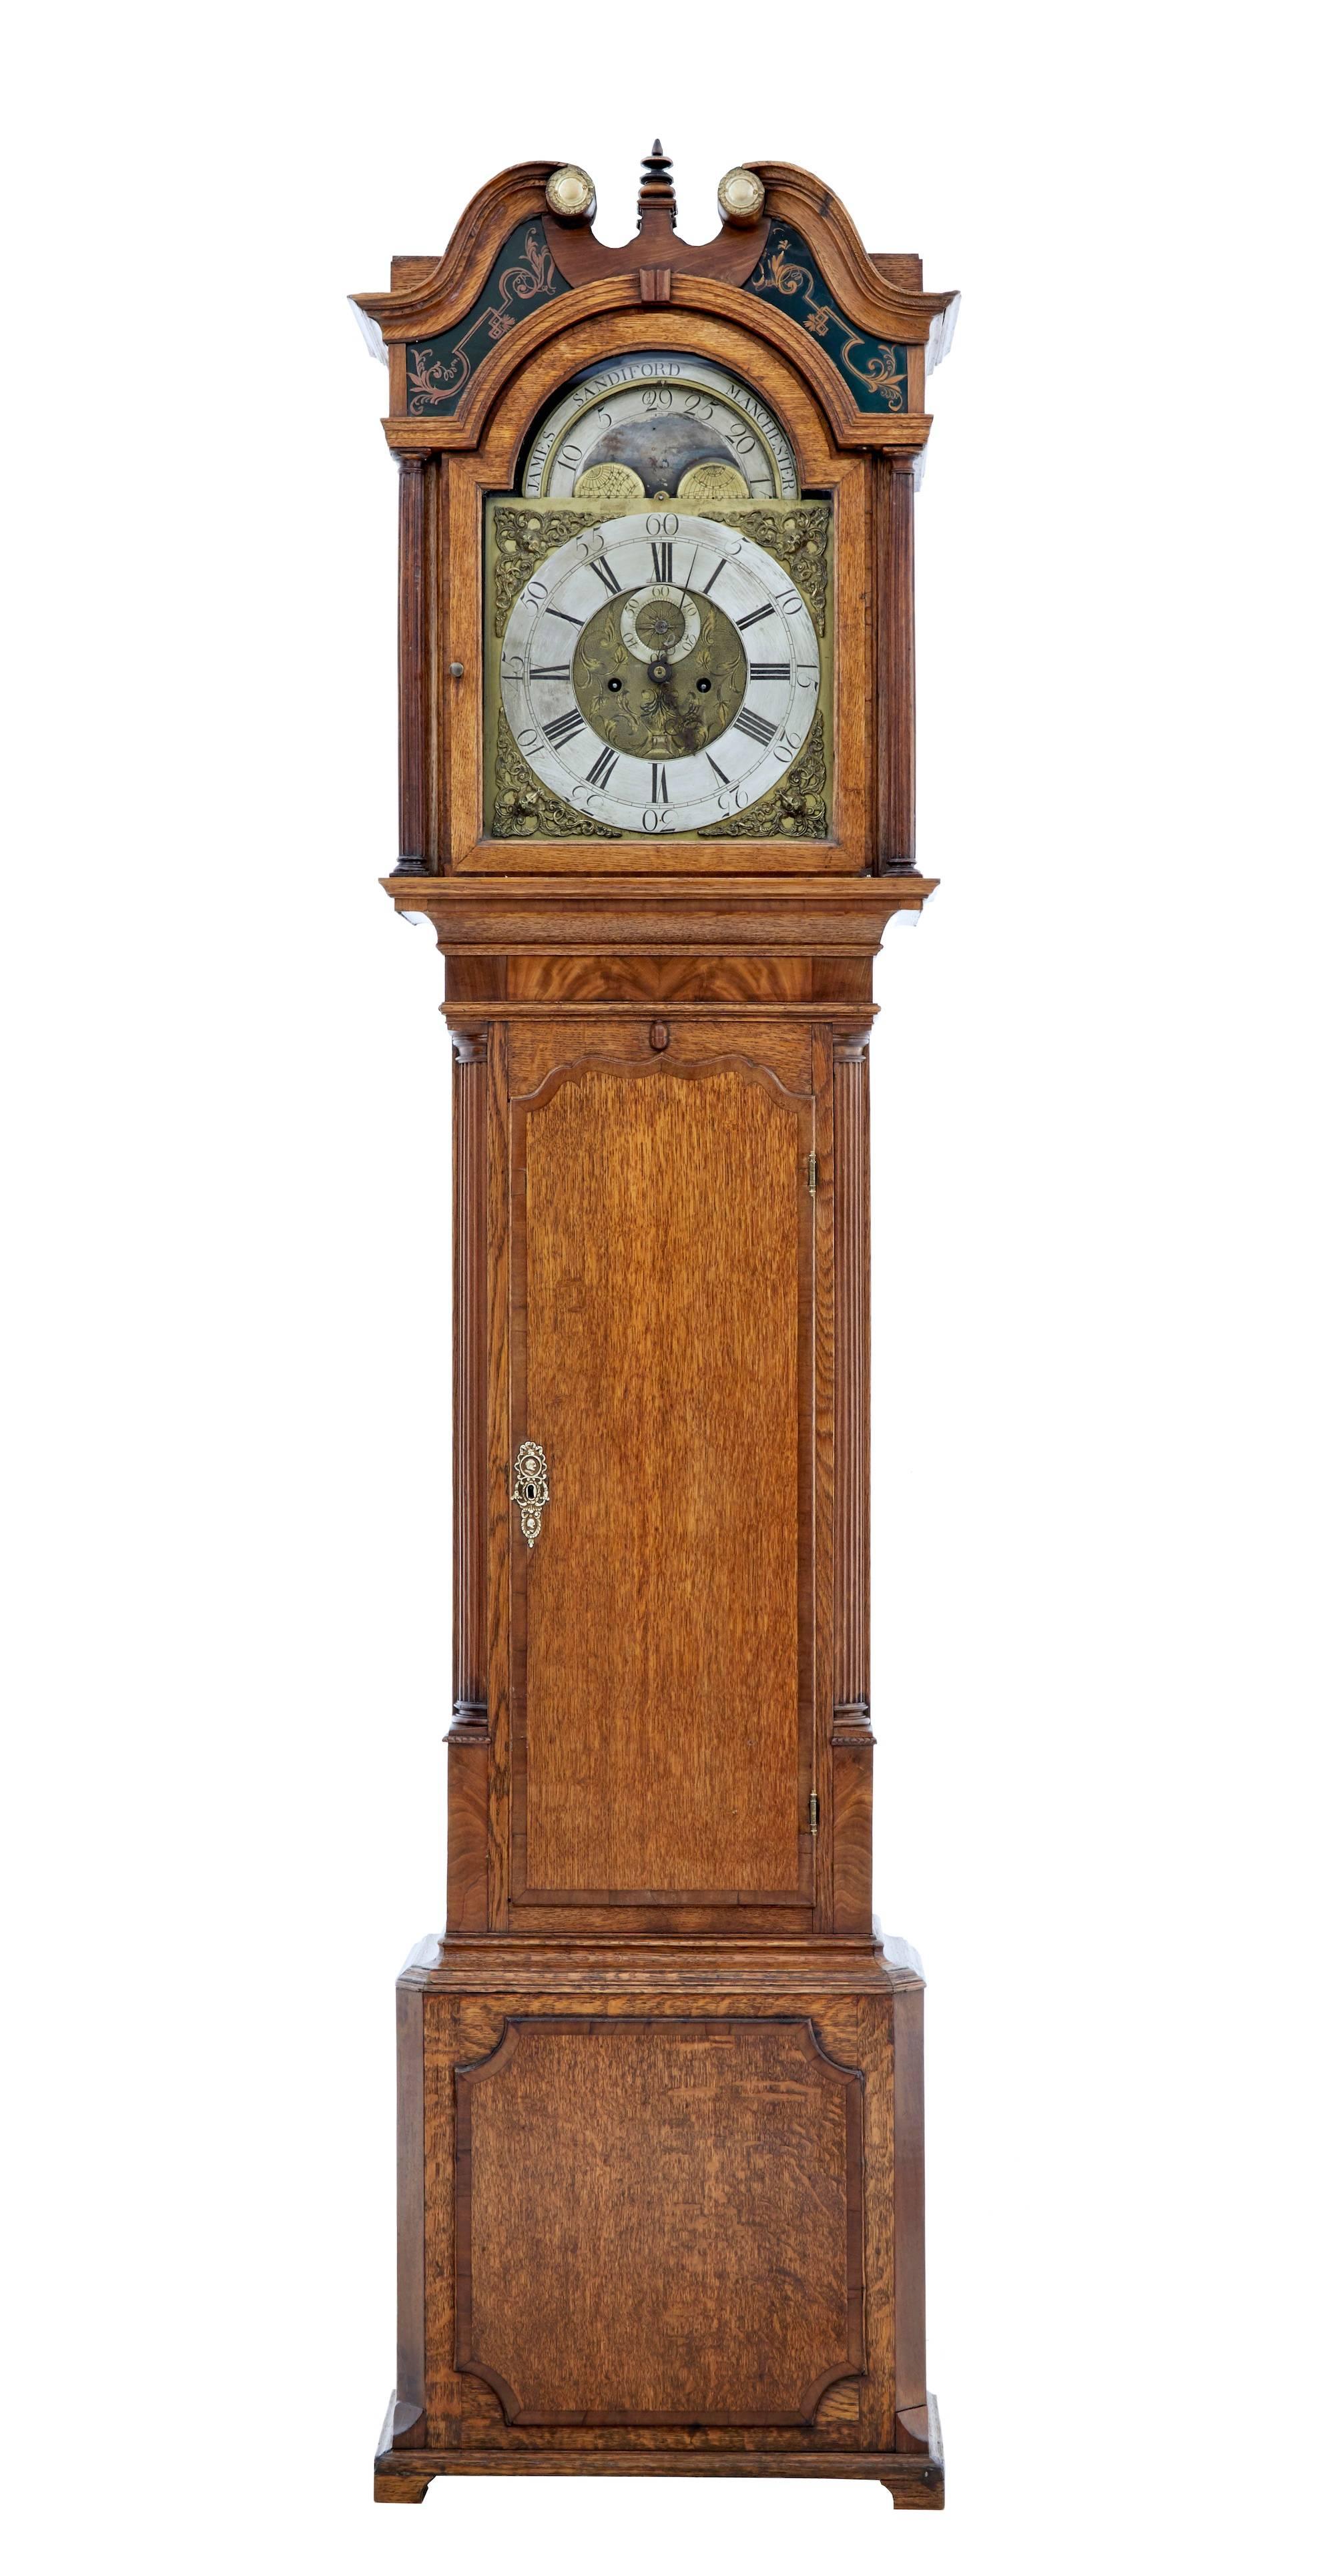 George II oak longcase clock, circa 1750
Movement made and signed by the well-known movement maker James Sandiford of Manchester.
Movement with roman and Arabic numerals and calendar.
This movement will be professionally serviced immediately